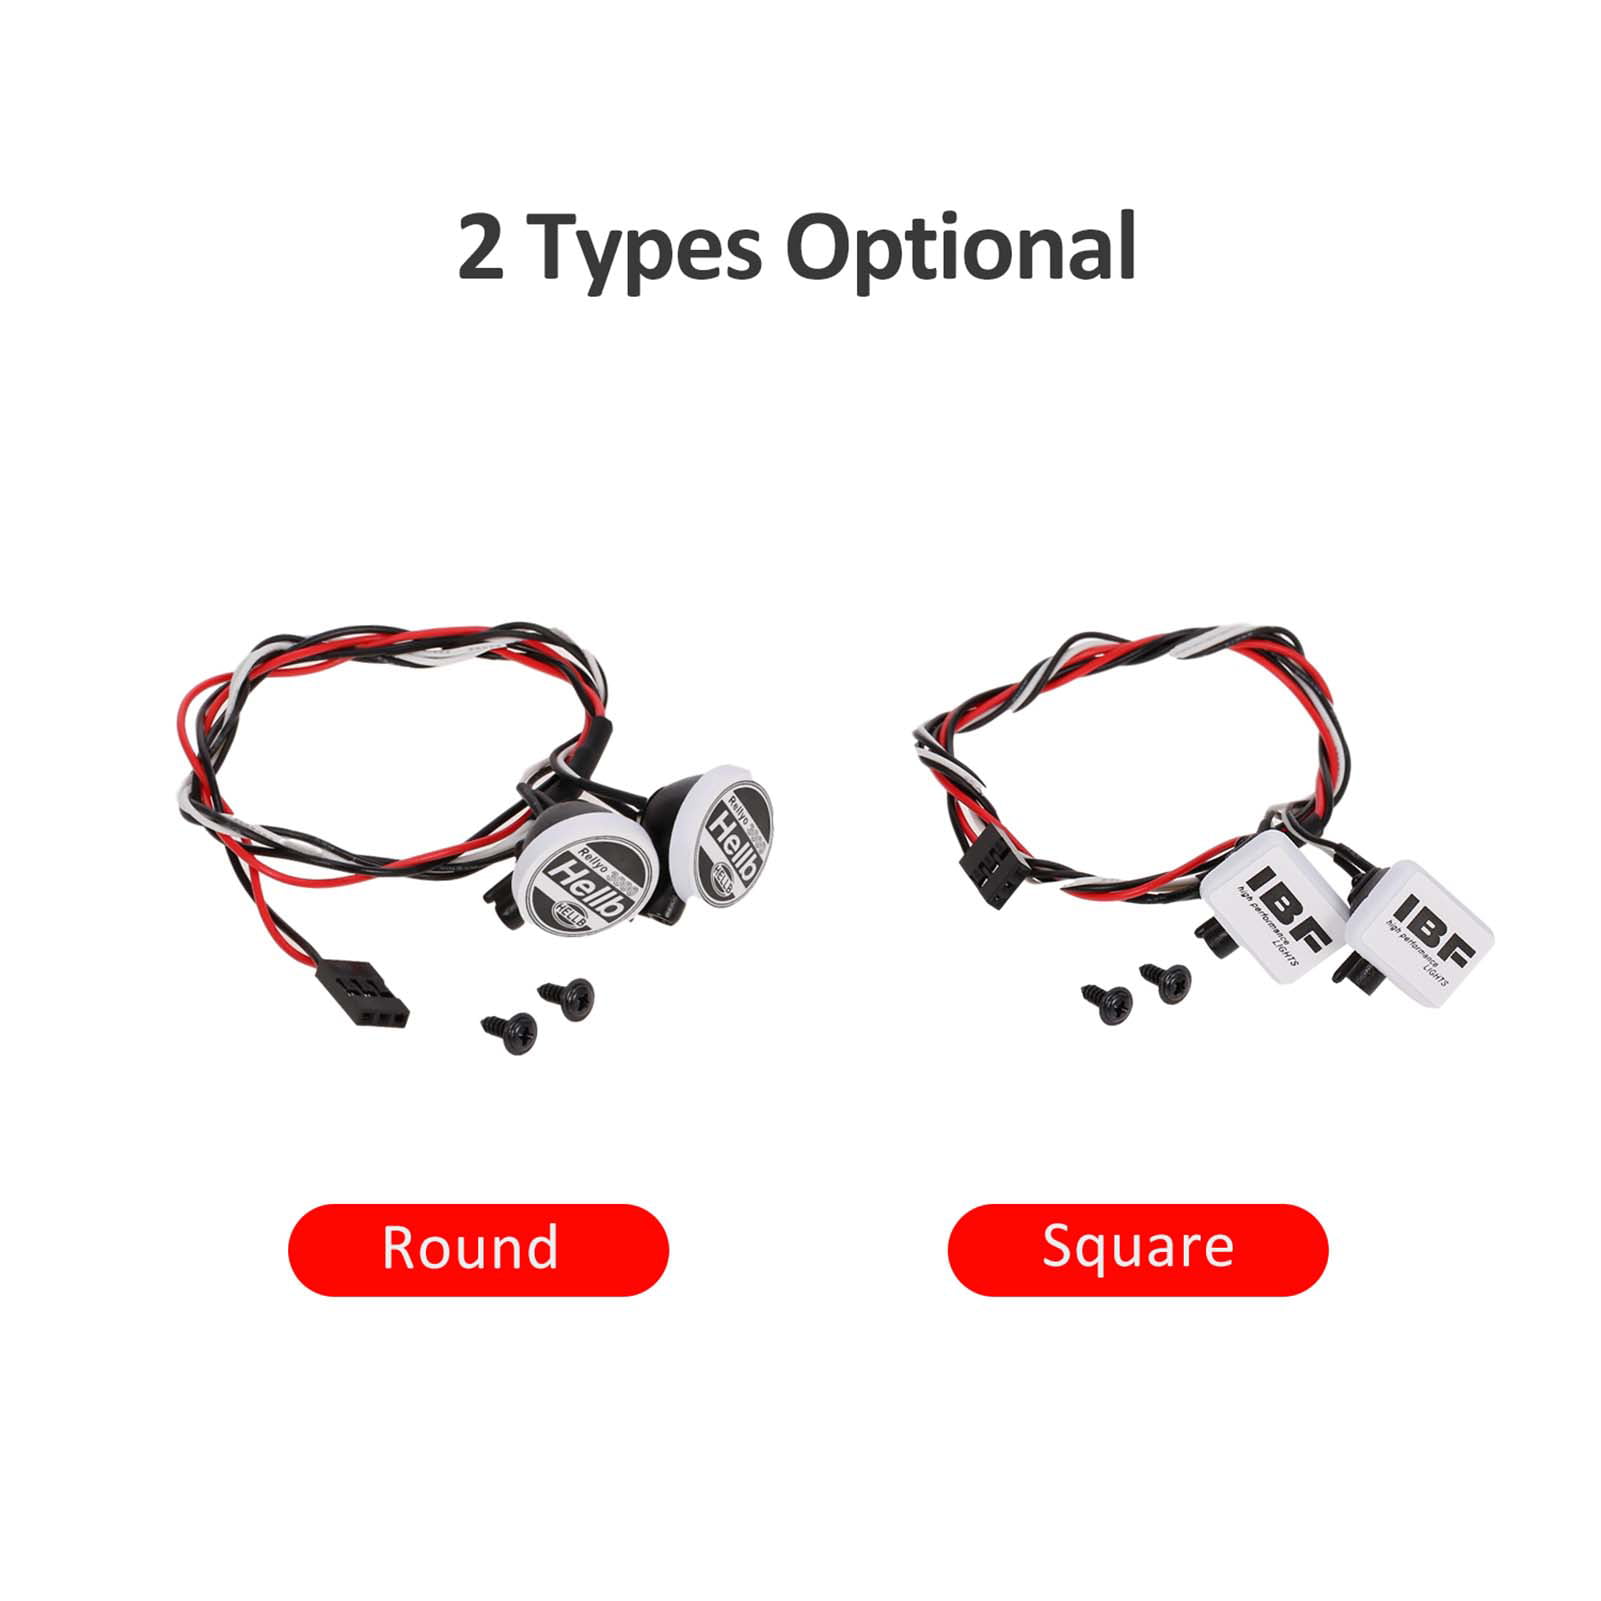 GoolRC 2PCS RC Car LED Light Kit with Lampshade White Lights 5.5-11V RC Decoration Common LEDs RC Accessories Round 